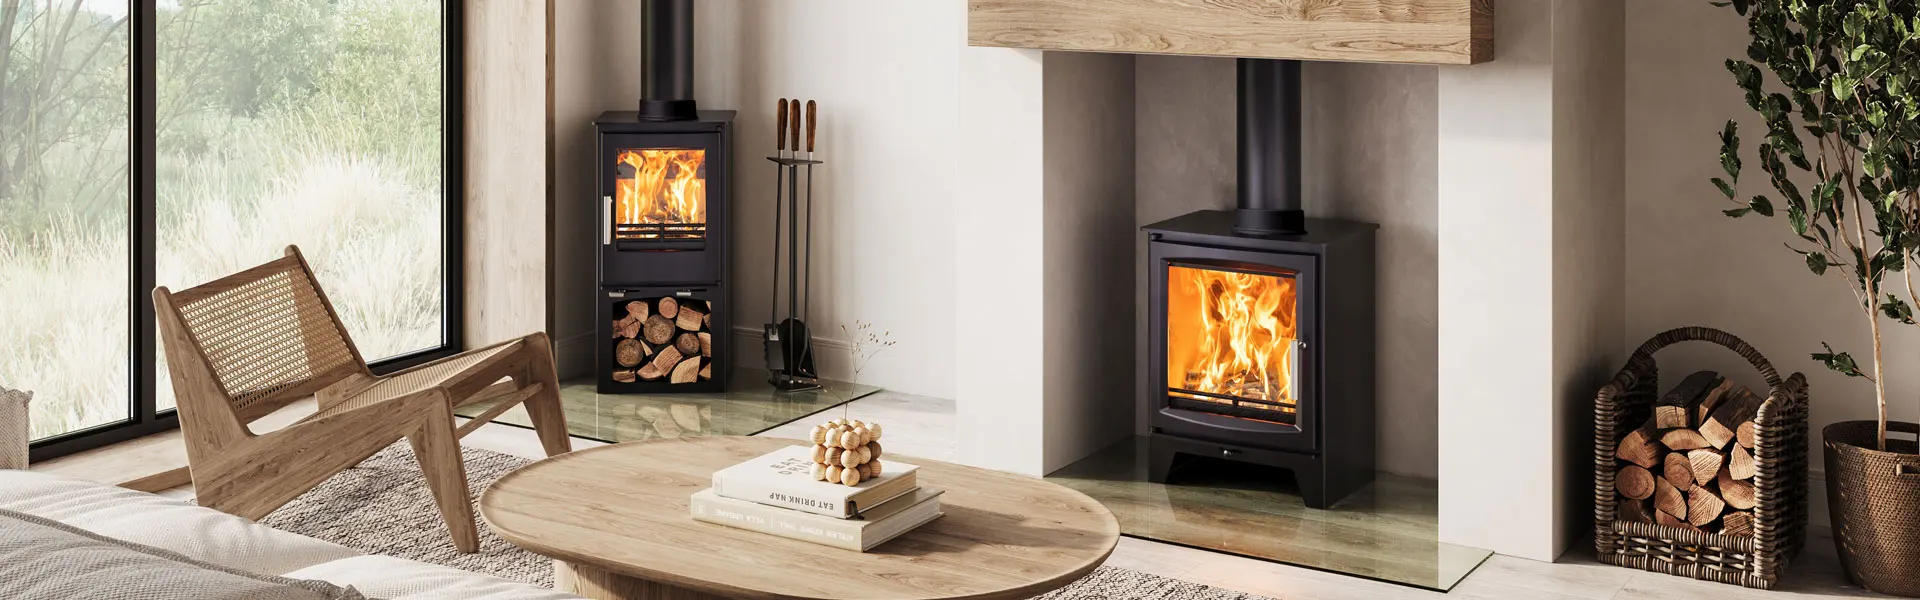 Ignite Your Colourful Side: Black Wood Burning Multi-Fuel Stoves by Ecosy+